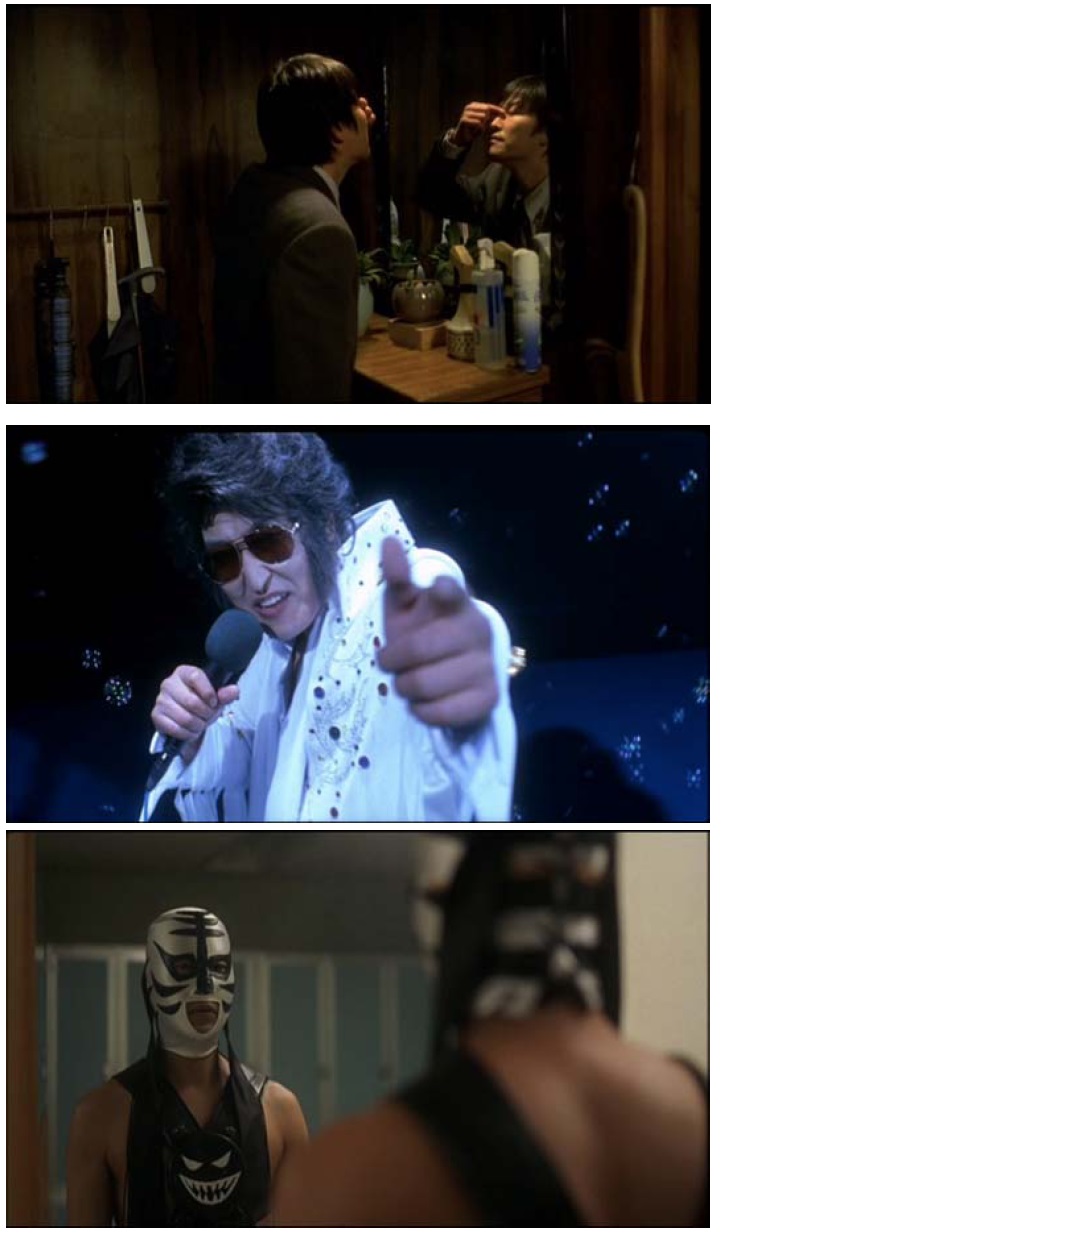 Film stills from the DVD The Foul King (2000, B.O.M. Film Productions). Top: Dae-ho at home tending to his injuries caused by the chasing hoodlums; middle: dream sequence in which Dae-ho is a singing Elvis wrestler who conquers his masked opponent (until he learns the opponent is actually his abusive boss); bottom: Dae-ho in his wrestling mask looking into the changing room mirror before the big match.